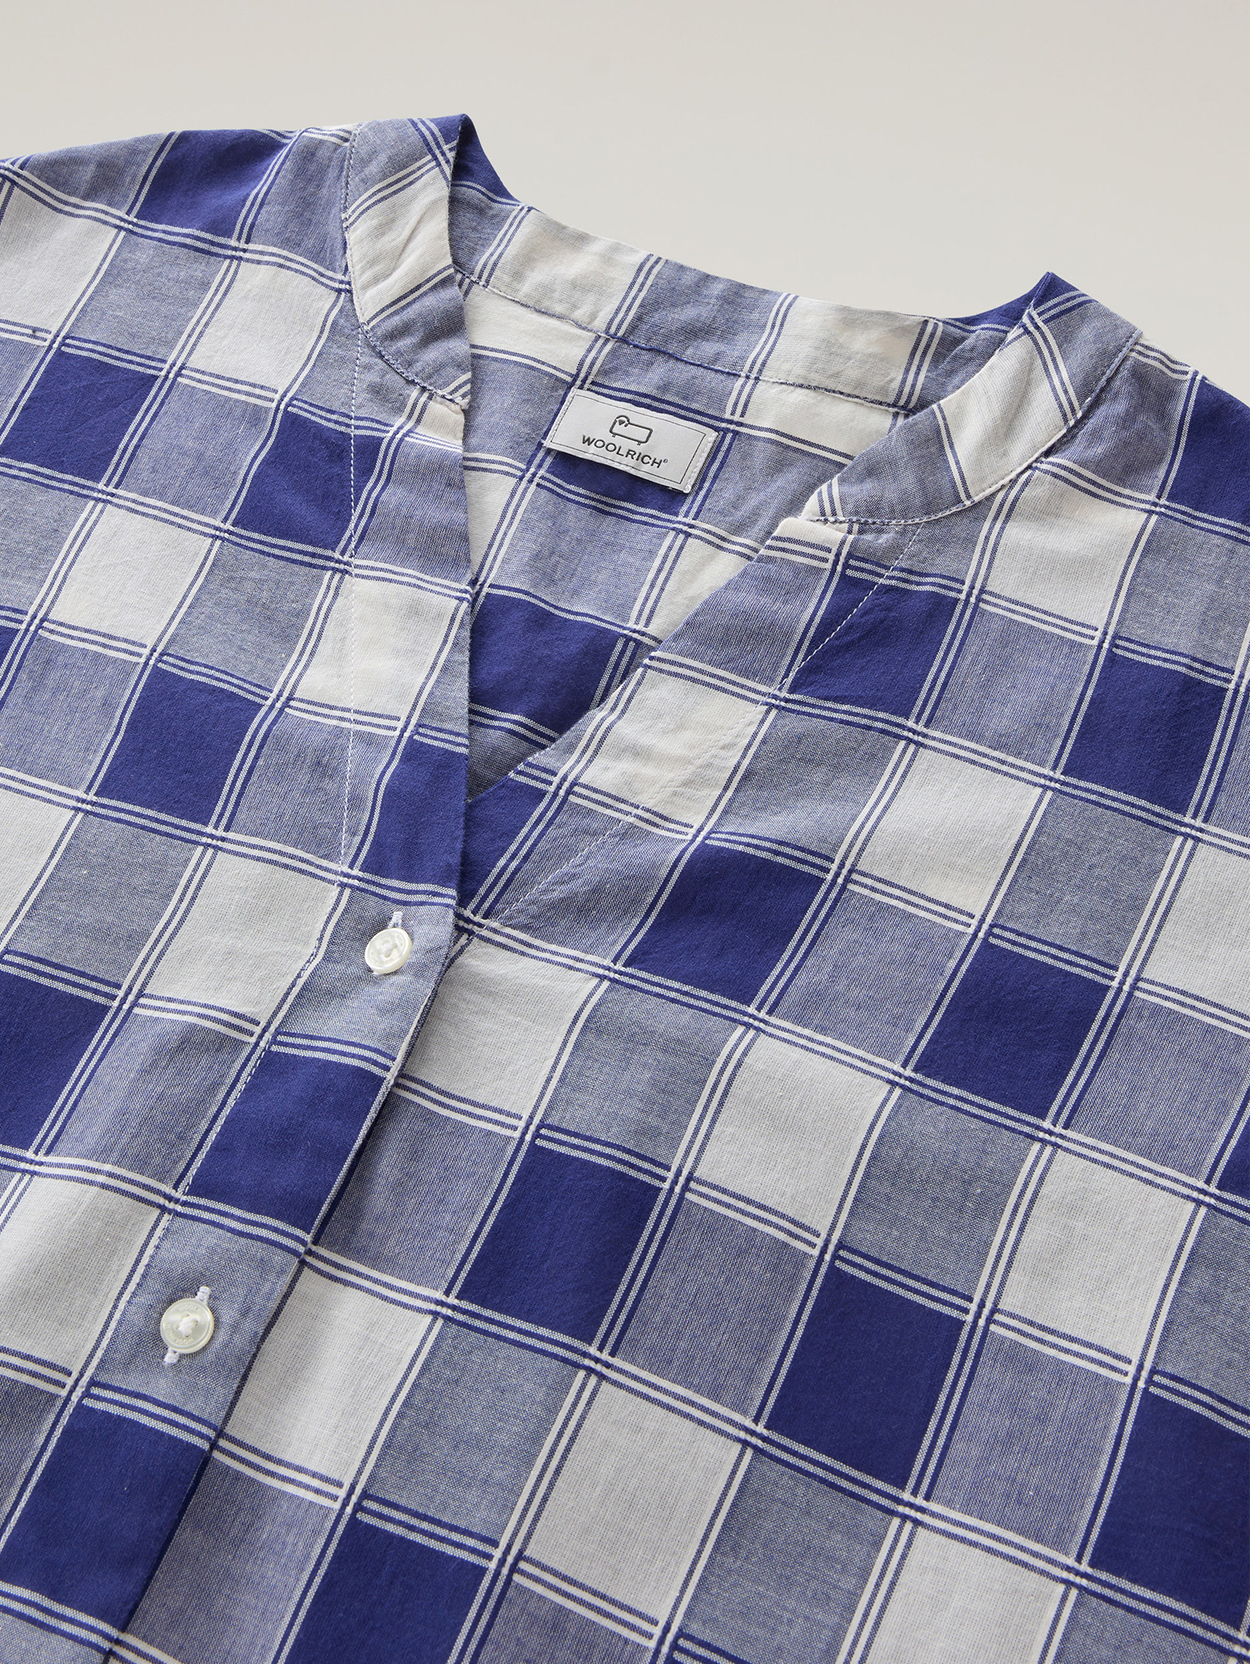 WOOLRICH CHECK VOILE SHIRT